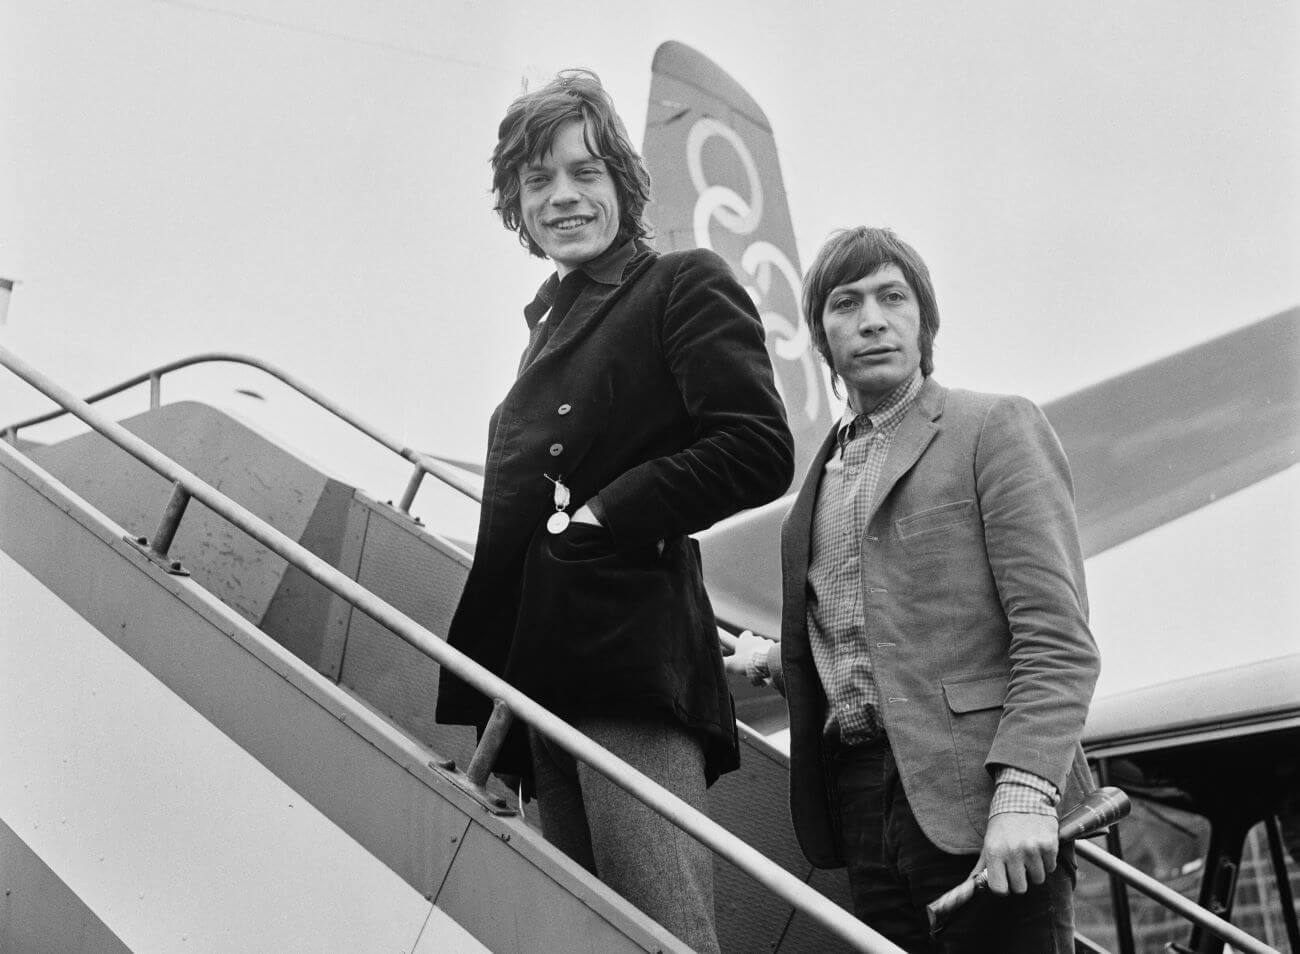 A black and white picture of Mick Jagger and Charlie Watts on the stairs leading up to an airplane.